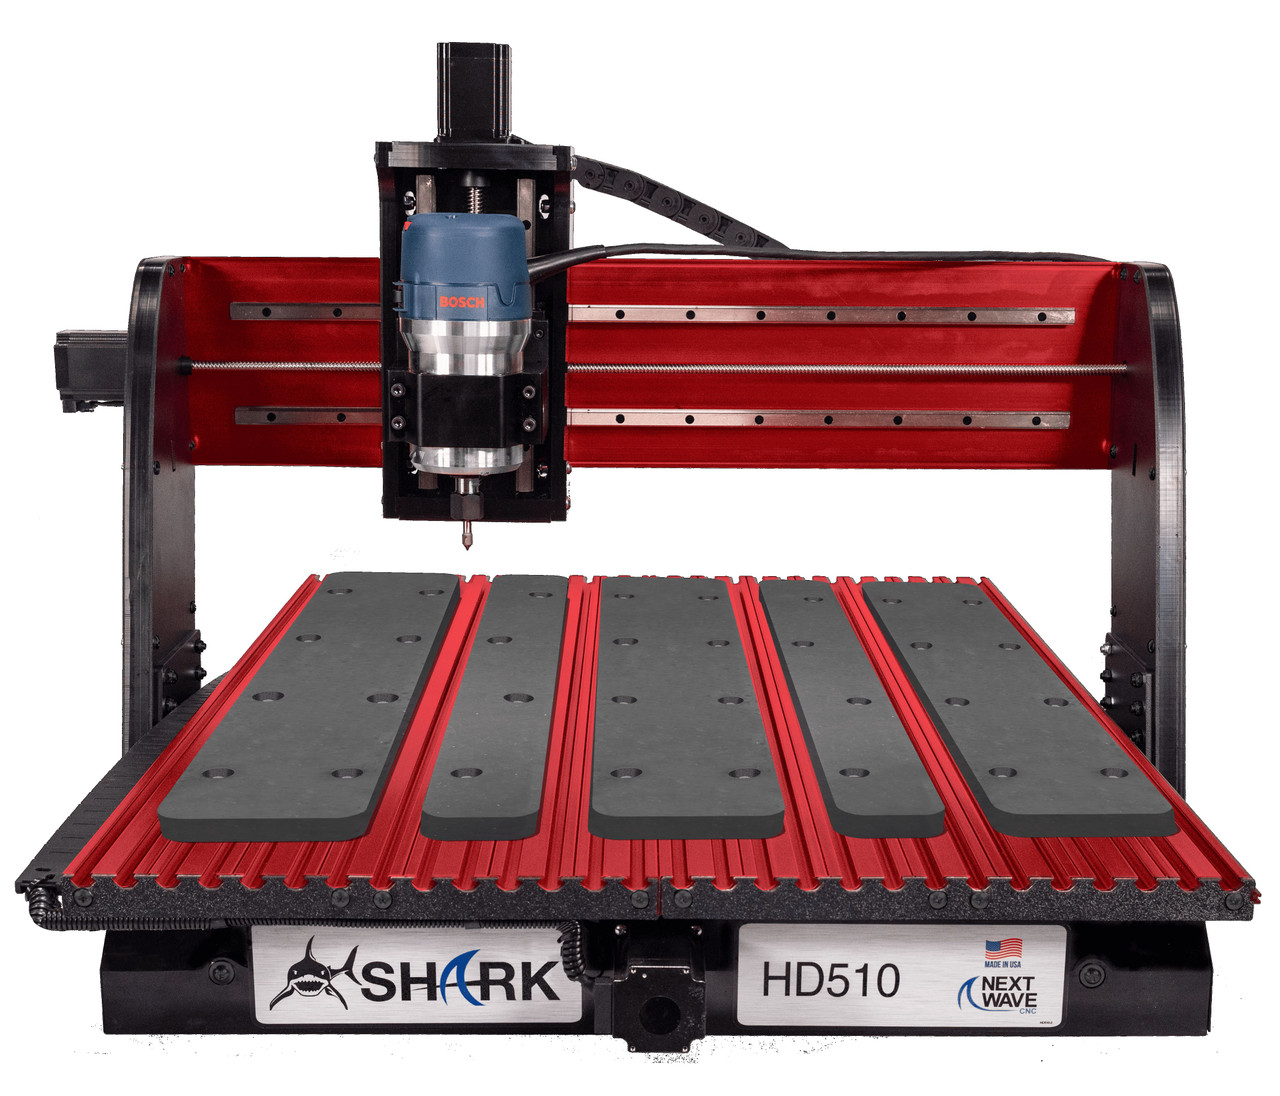 Next Wave HD510 Spoil Board Kit Protect your CNC Router table from Router bit damage and allow you to achieve a perfectly flat router table top